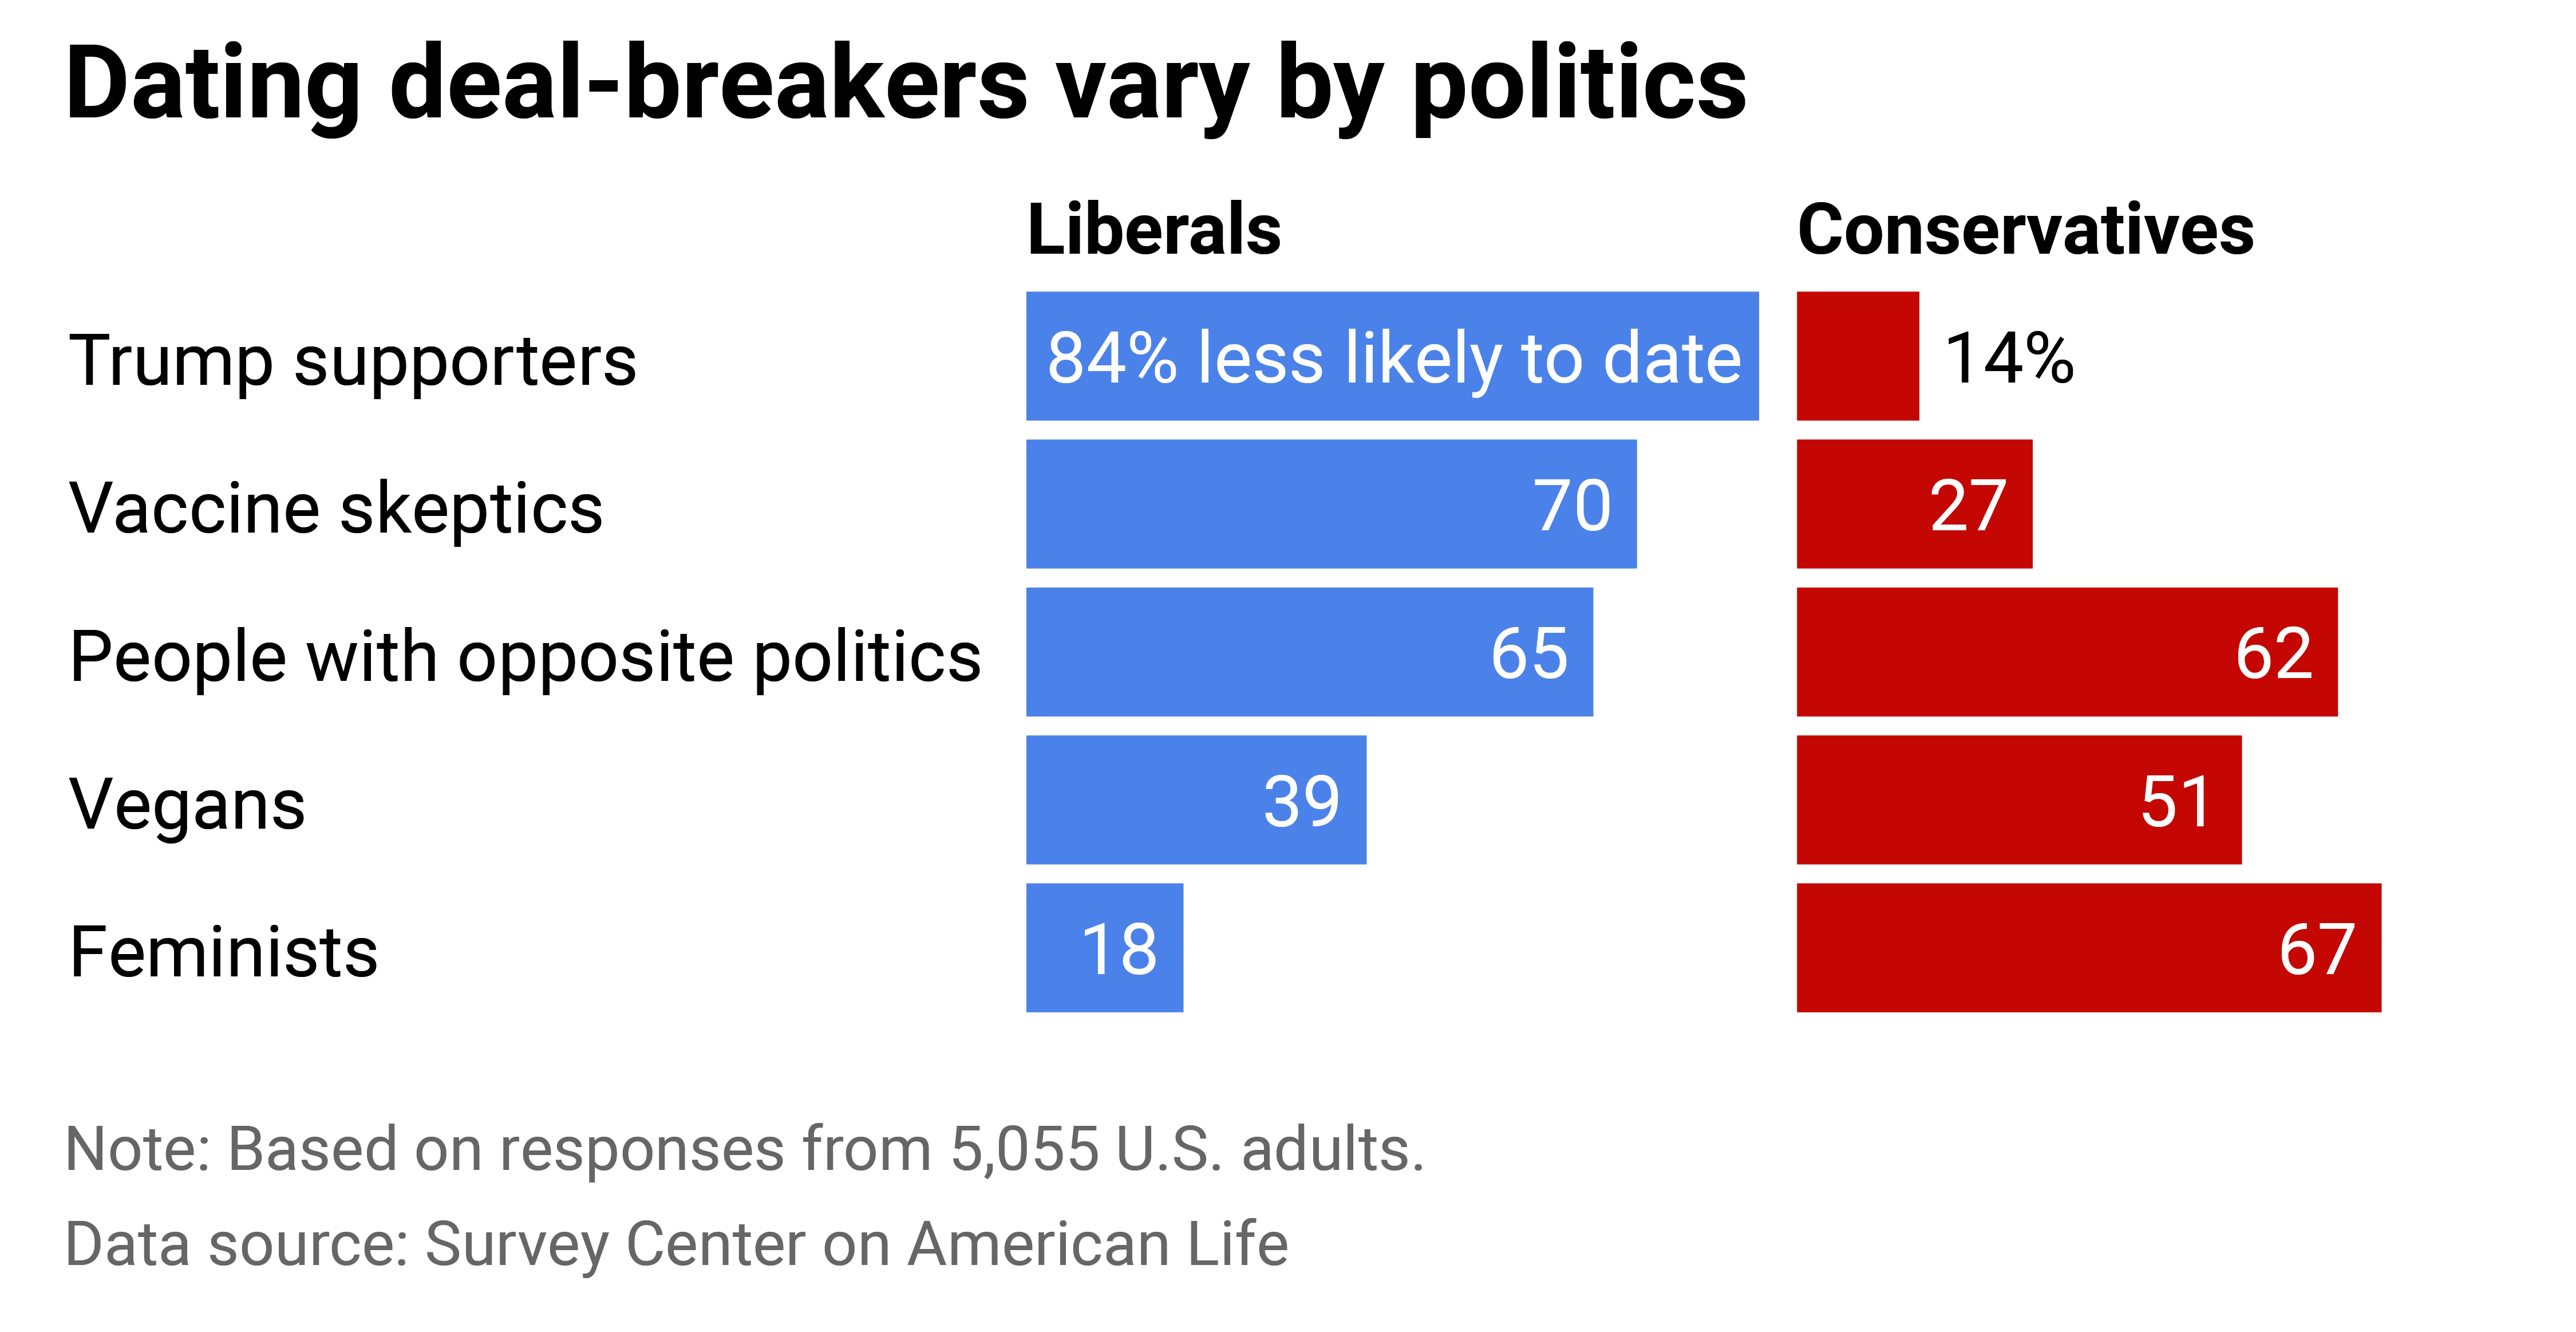 Split bar chart showing how dating dealbreakers vary by politics.